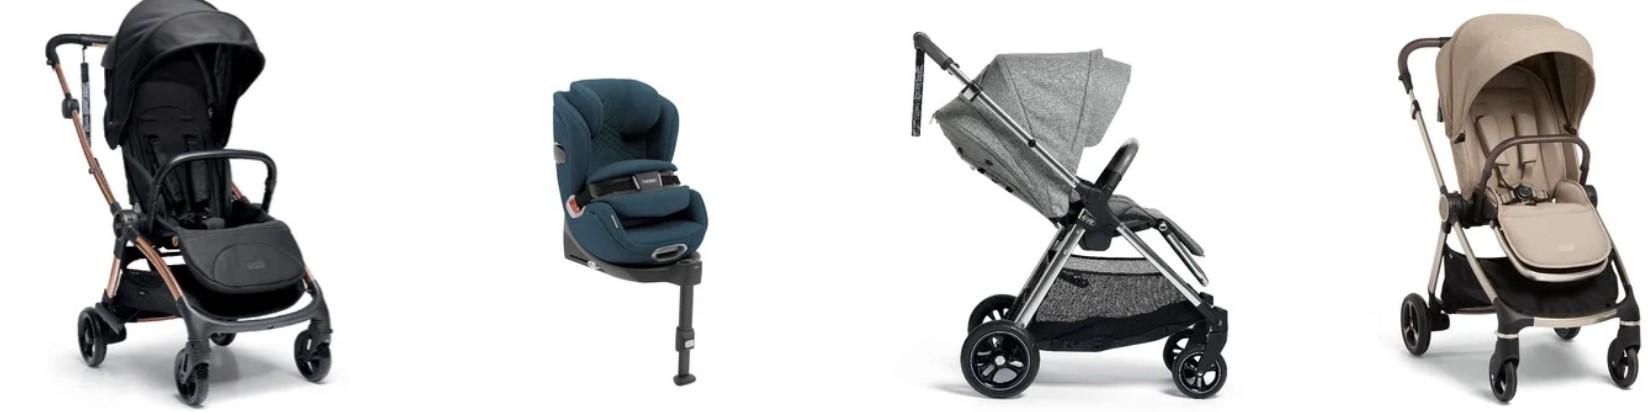 The Wheel Travel Gear for Babies